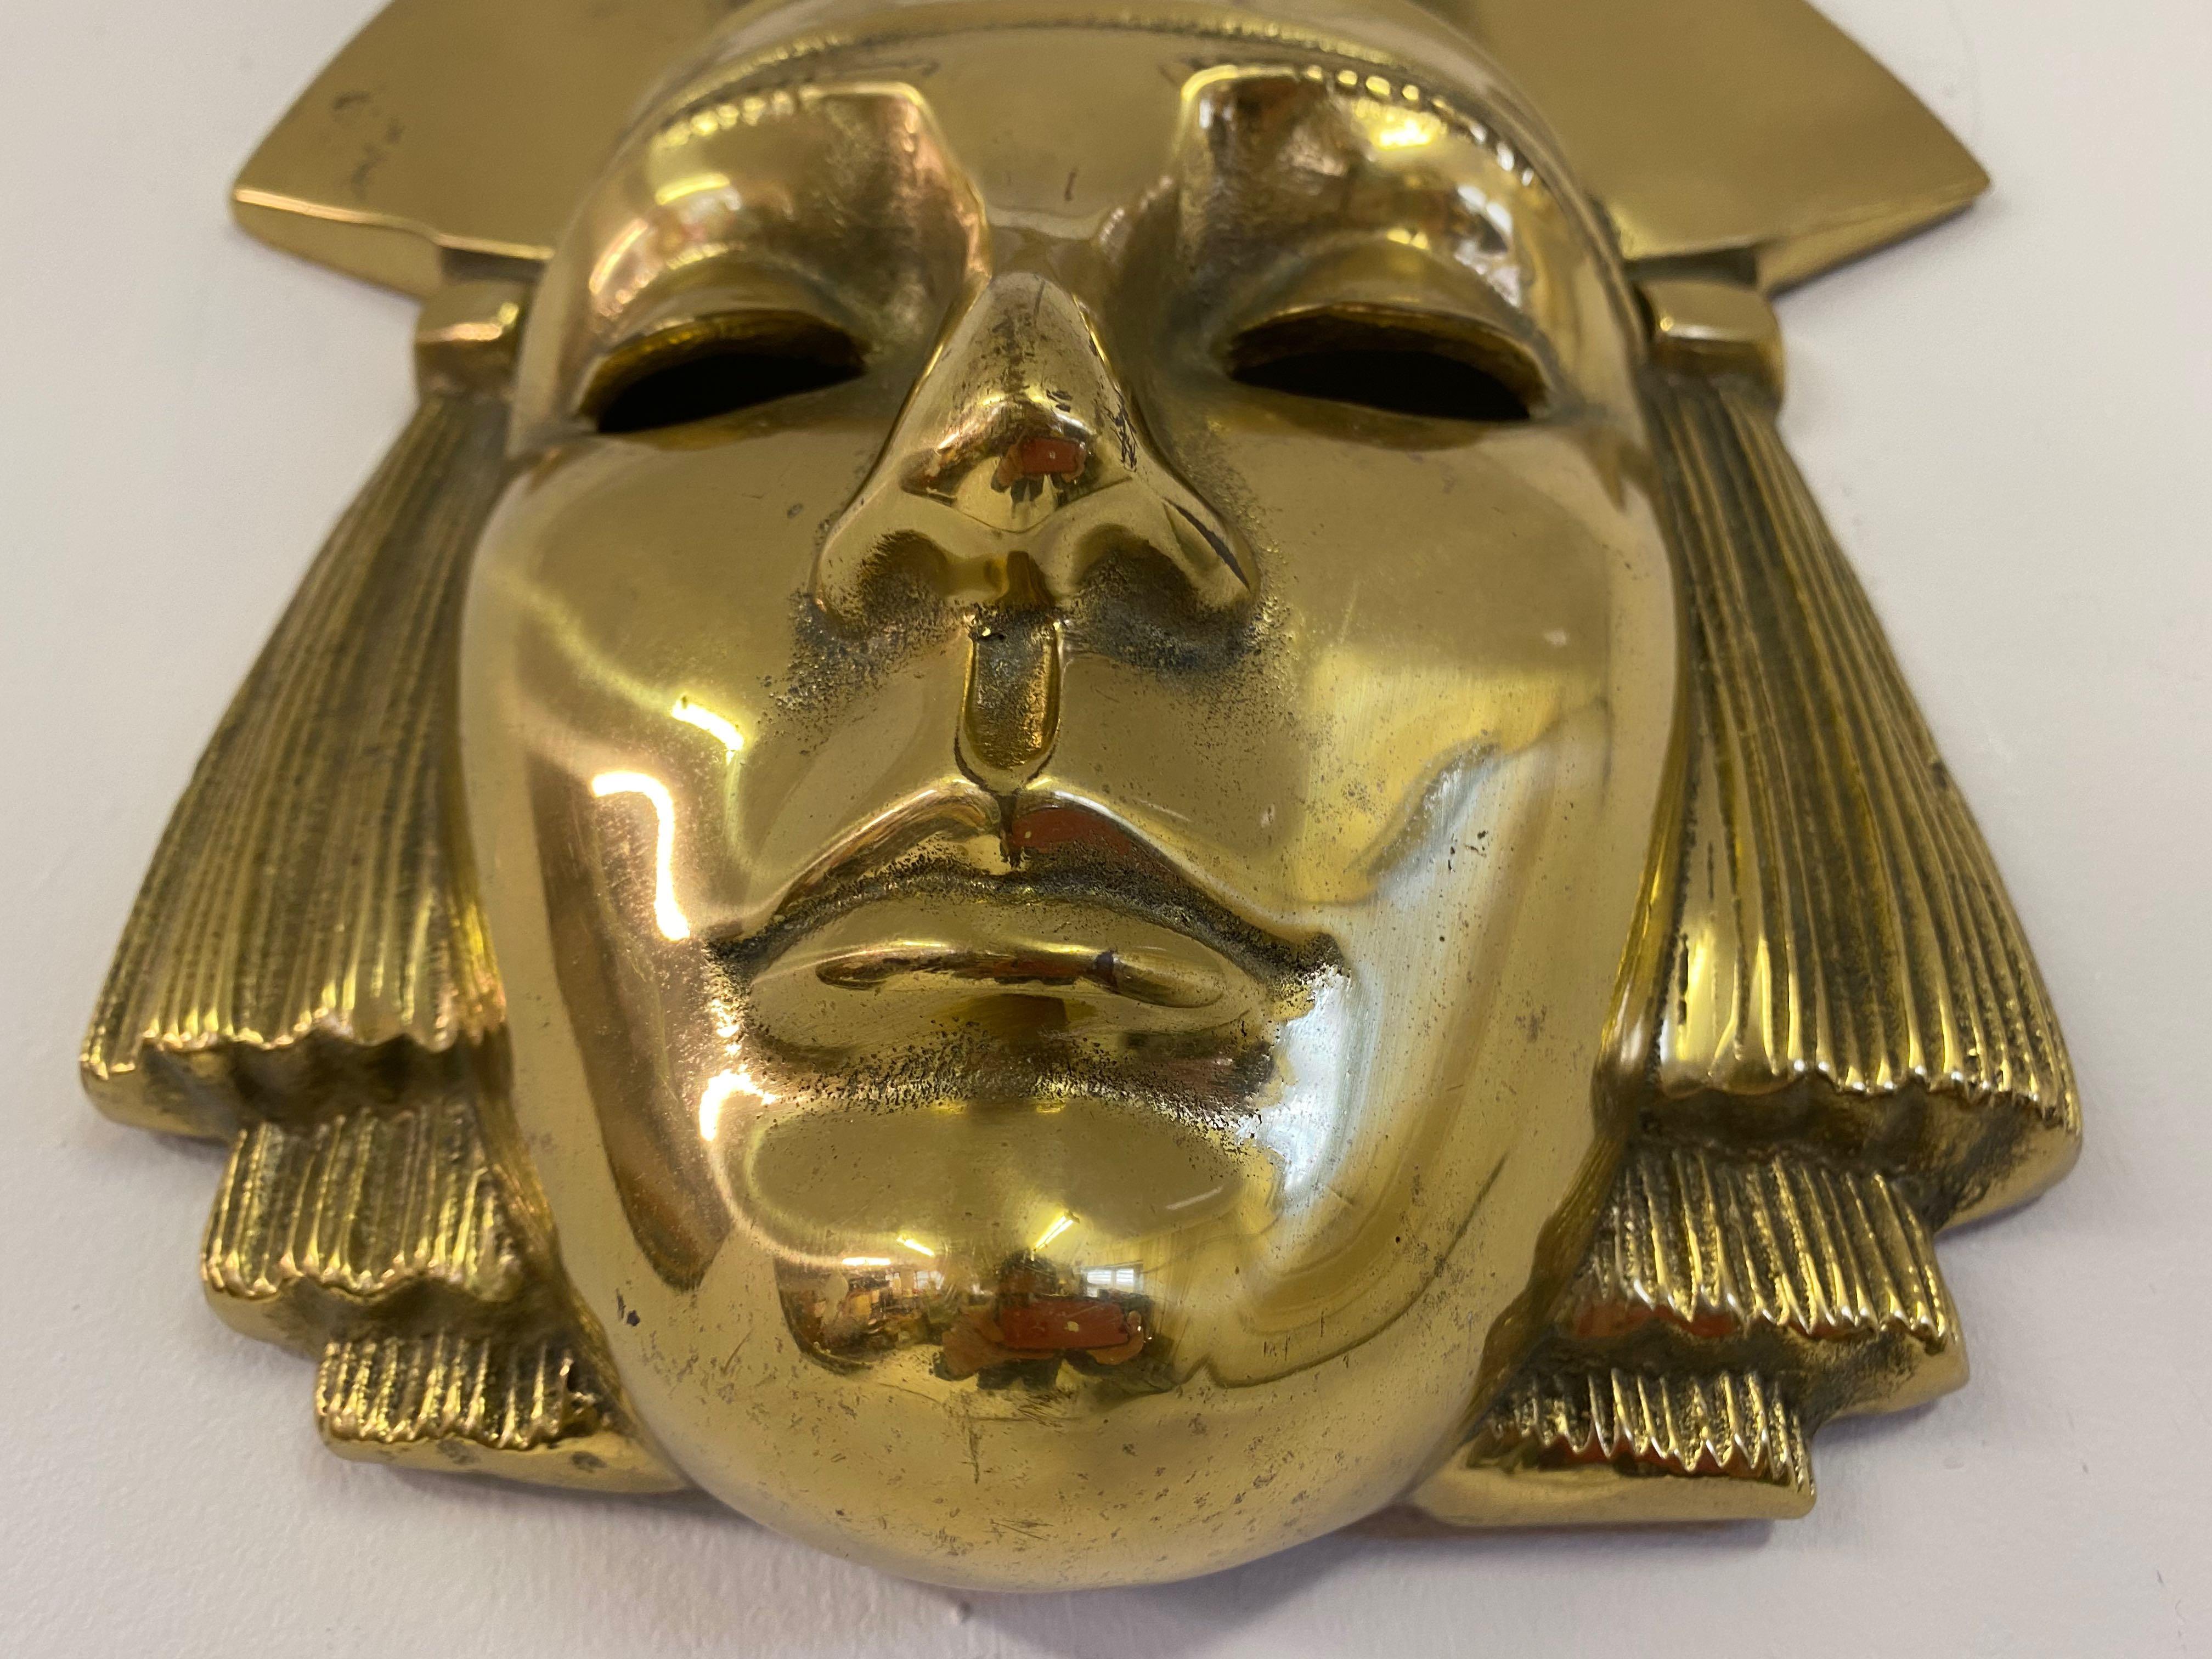 1970s Belgian Brass Hanging Pharaoh Face Plaque In Good Condition For Sale In London, London